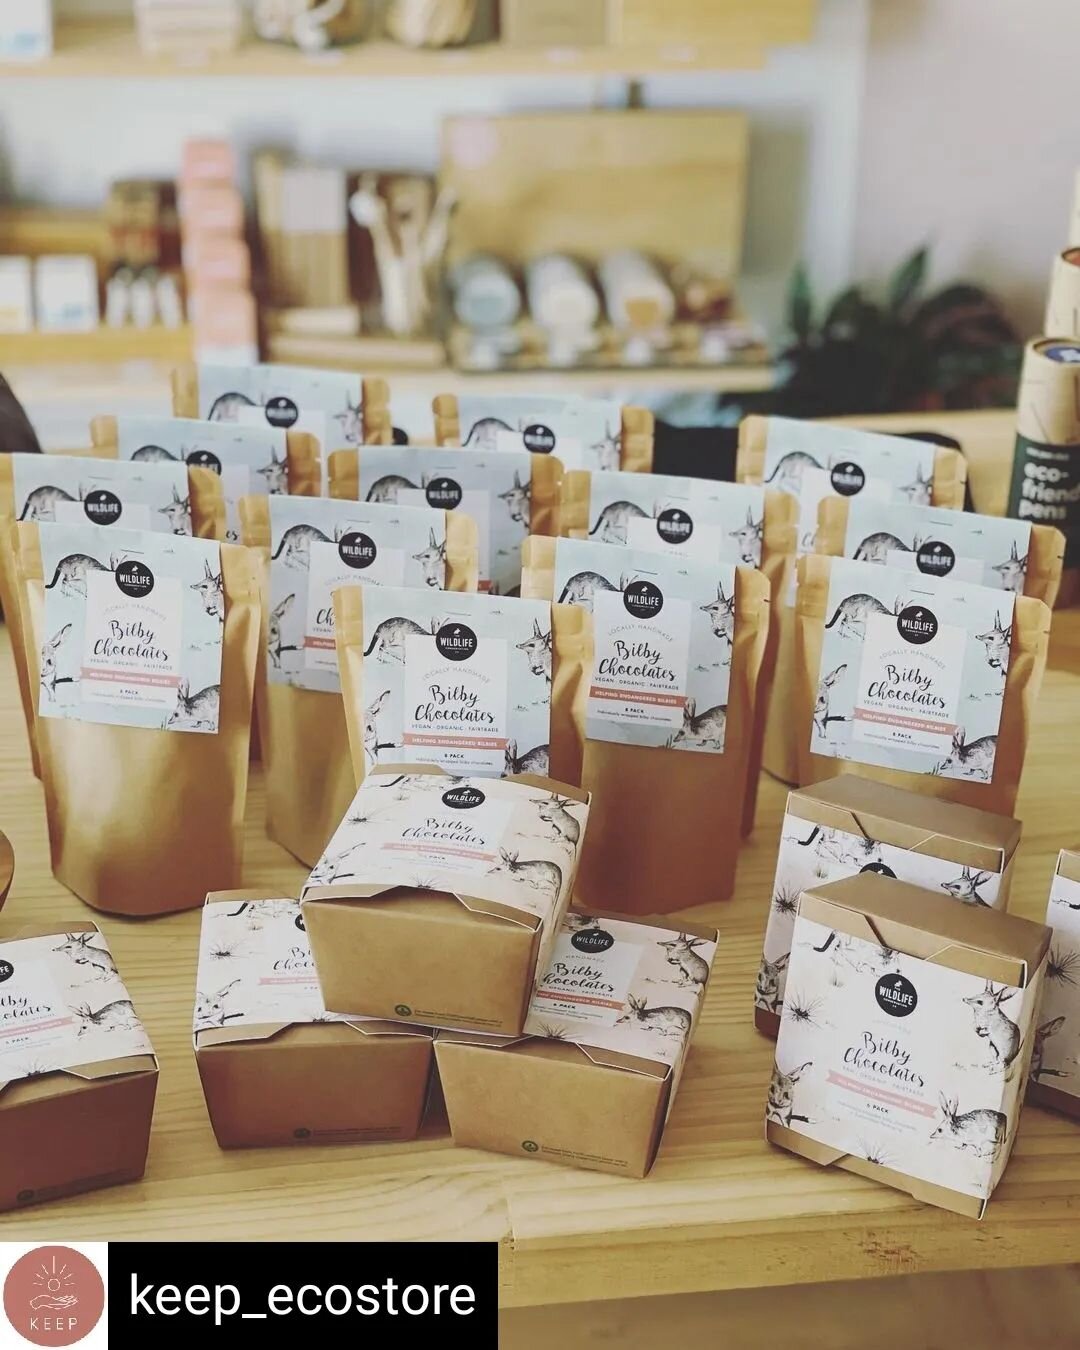 If you are near Woody Point, be sure to check out the lovely @keep_ecostore to pick up some Bilby Chocolates before they sell out again. 💕

#bilbyconservation
#bilbychocolate #bilby  #easterbilbychocolates #easterbilby #woodypoint 
.
.
Reposted from